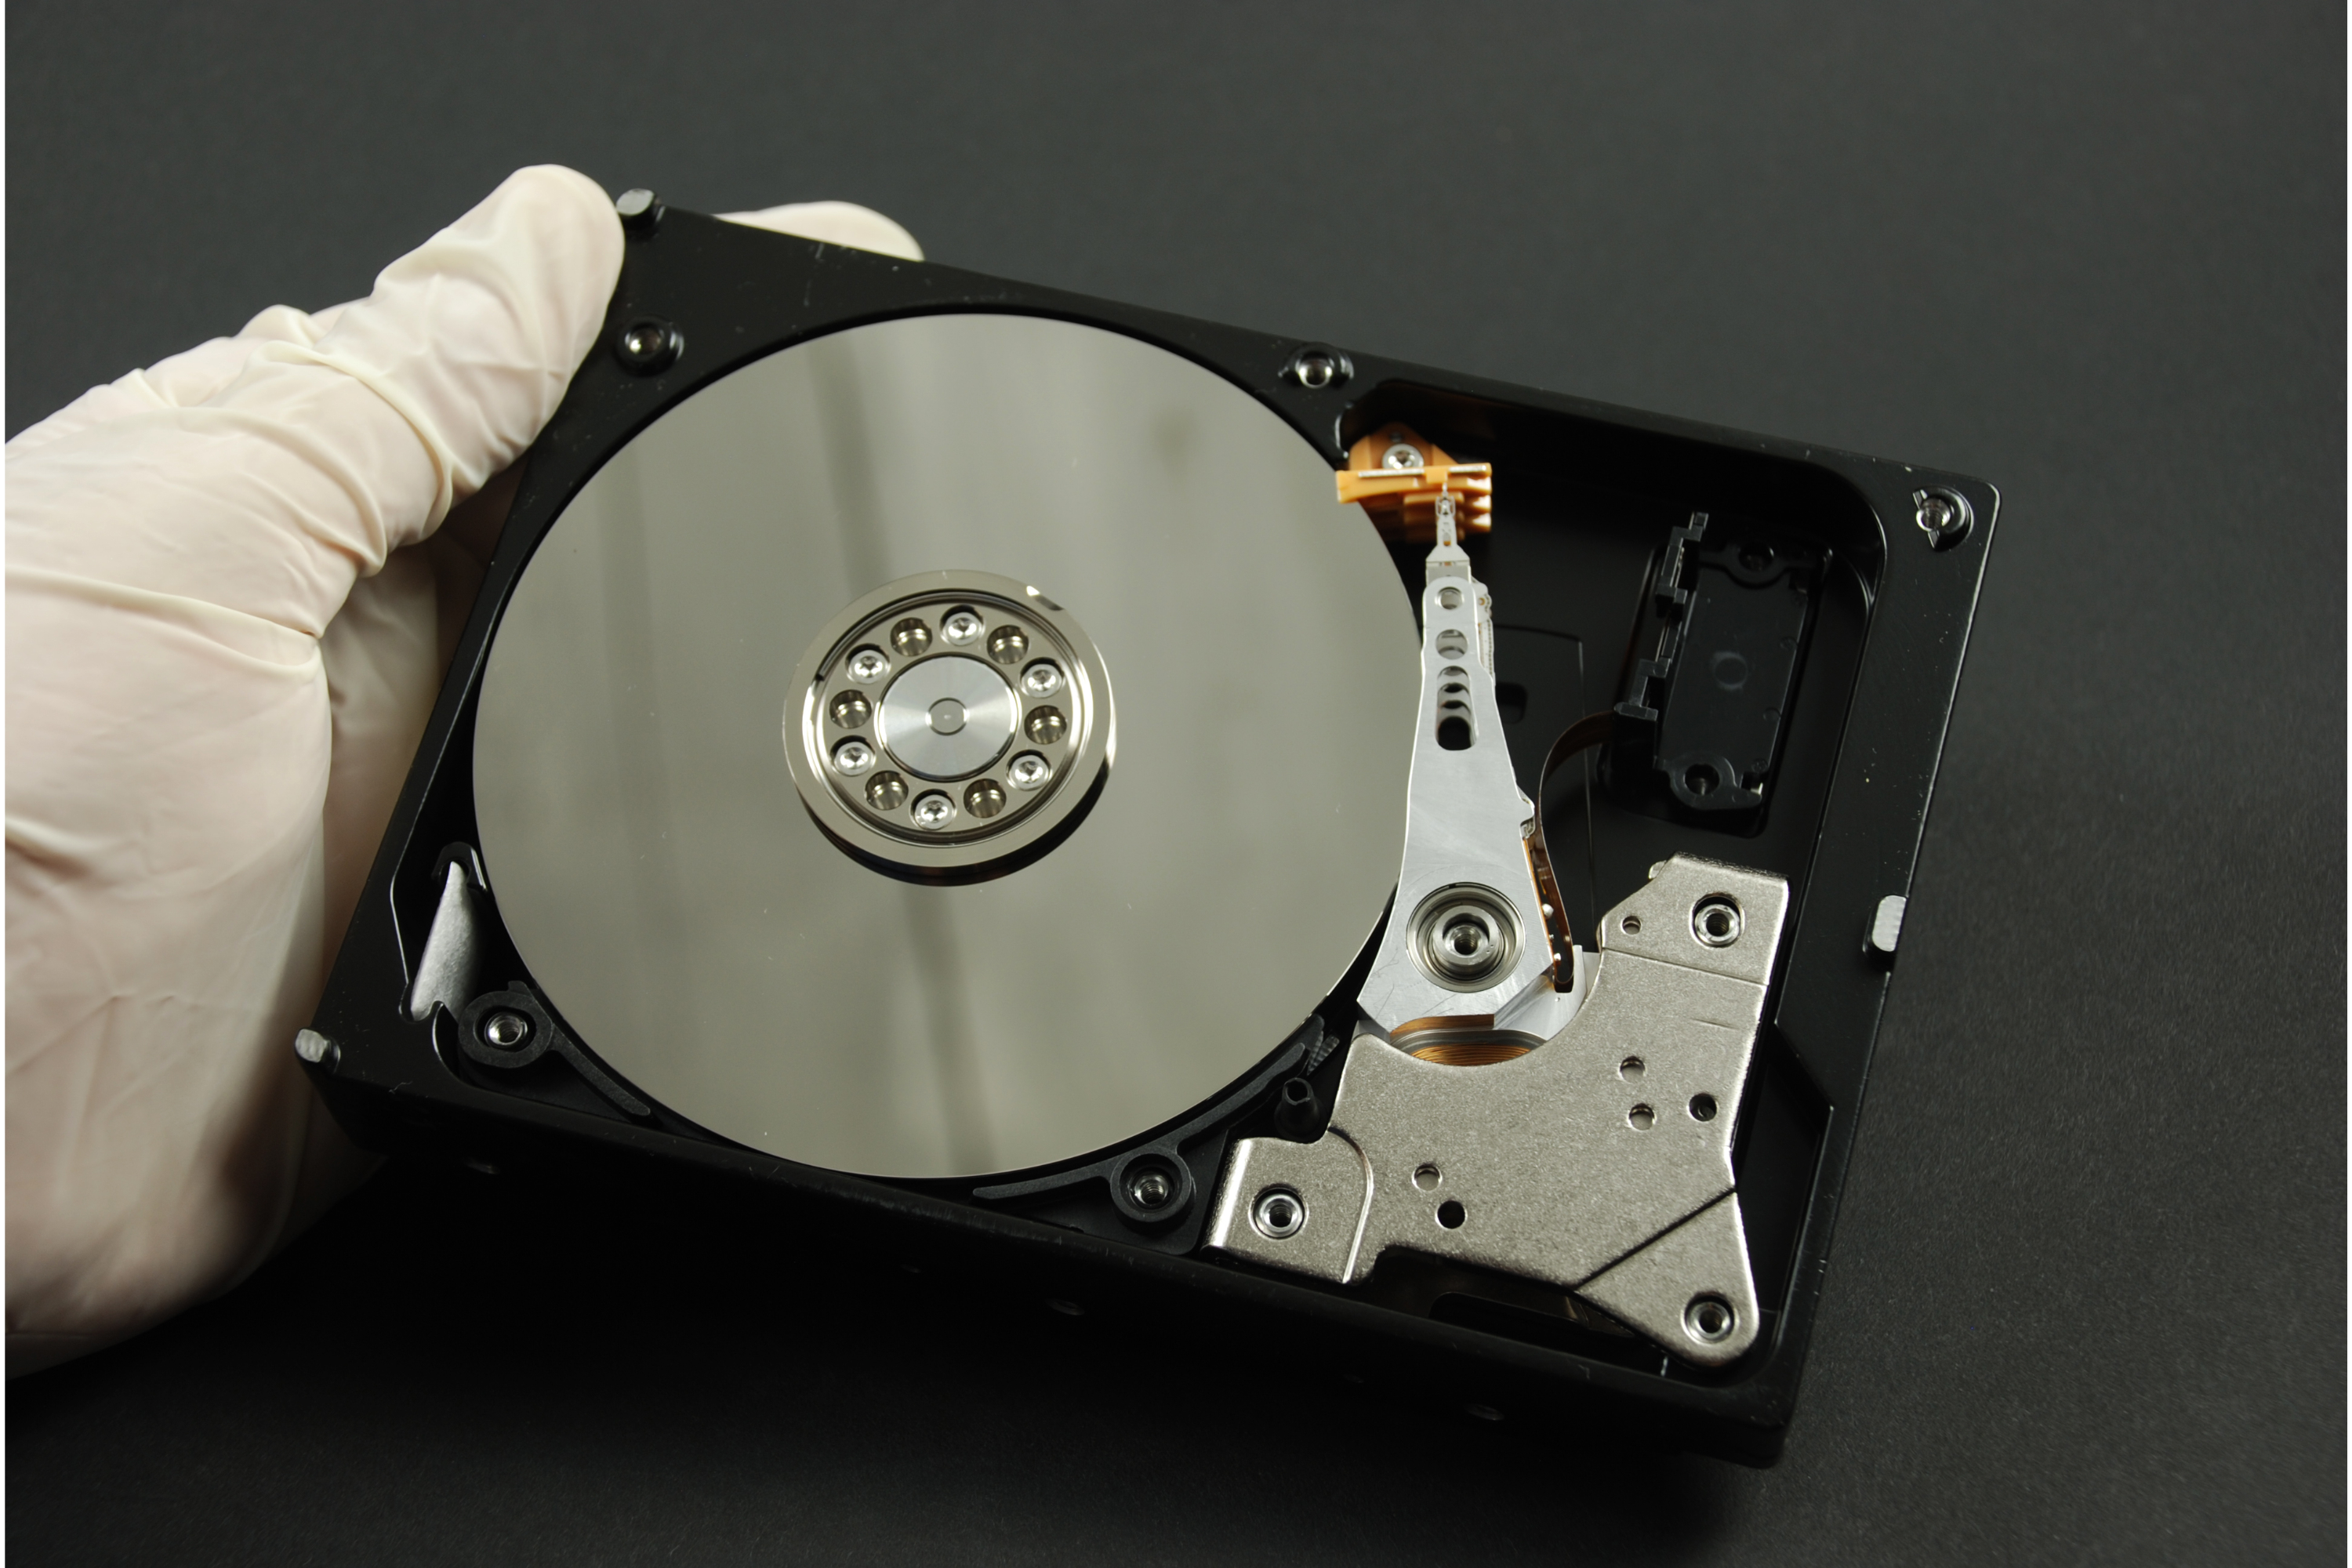 A technical professional holding a broken hard drive to perform data recovery